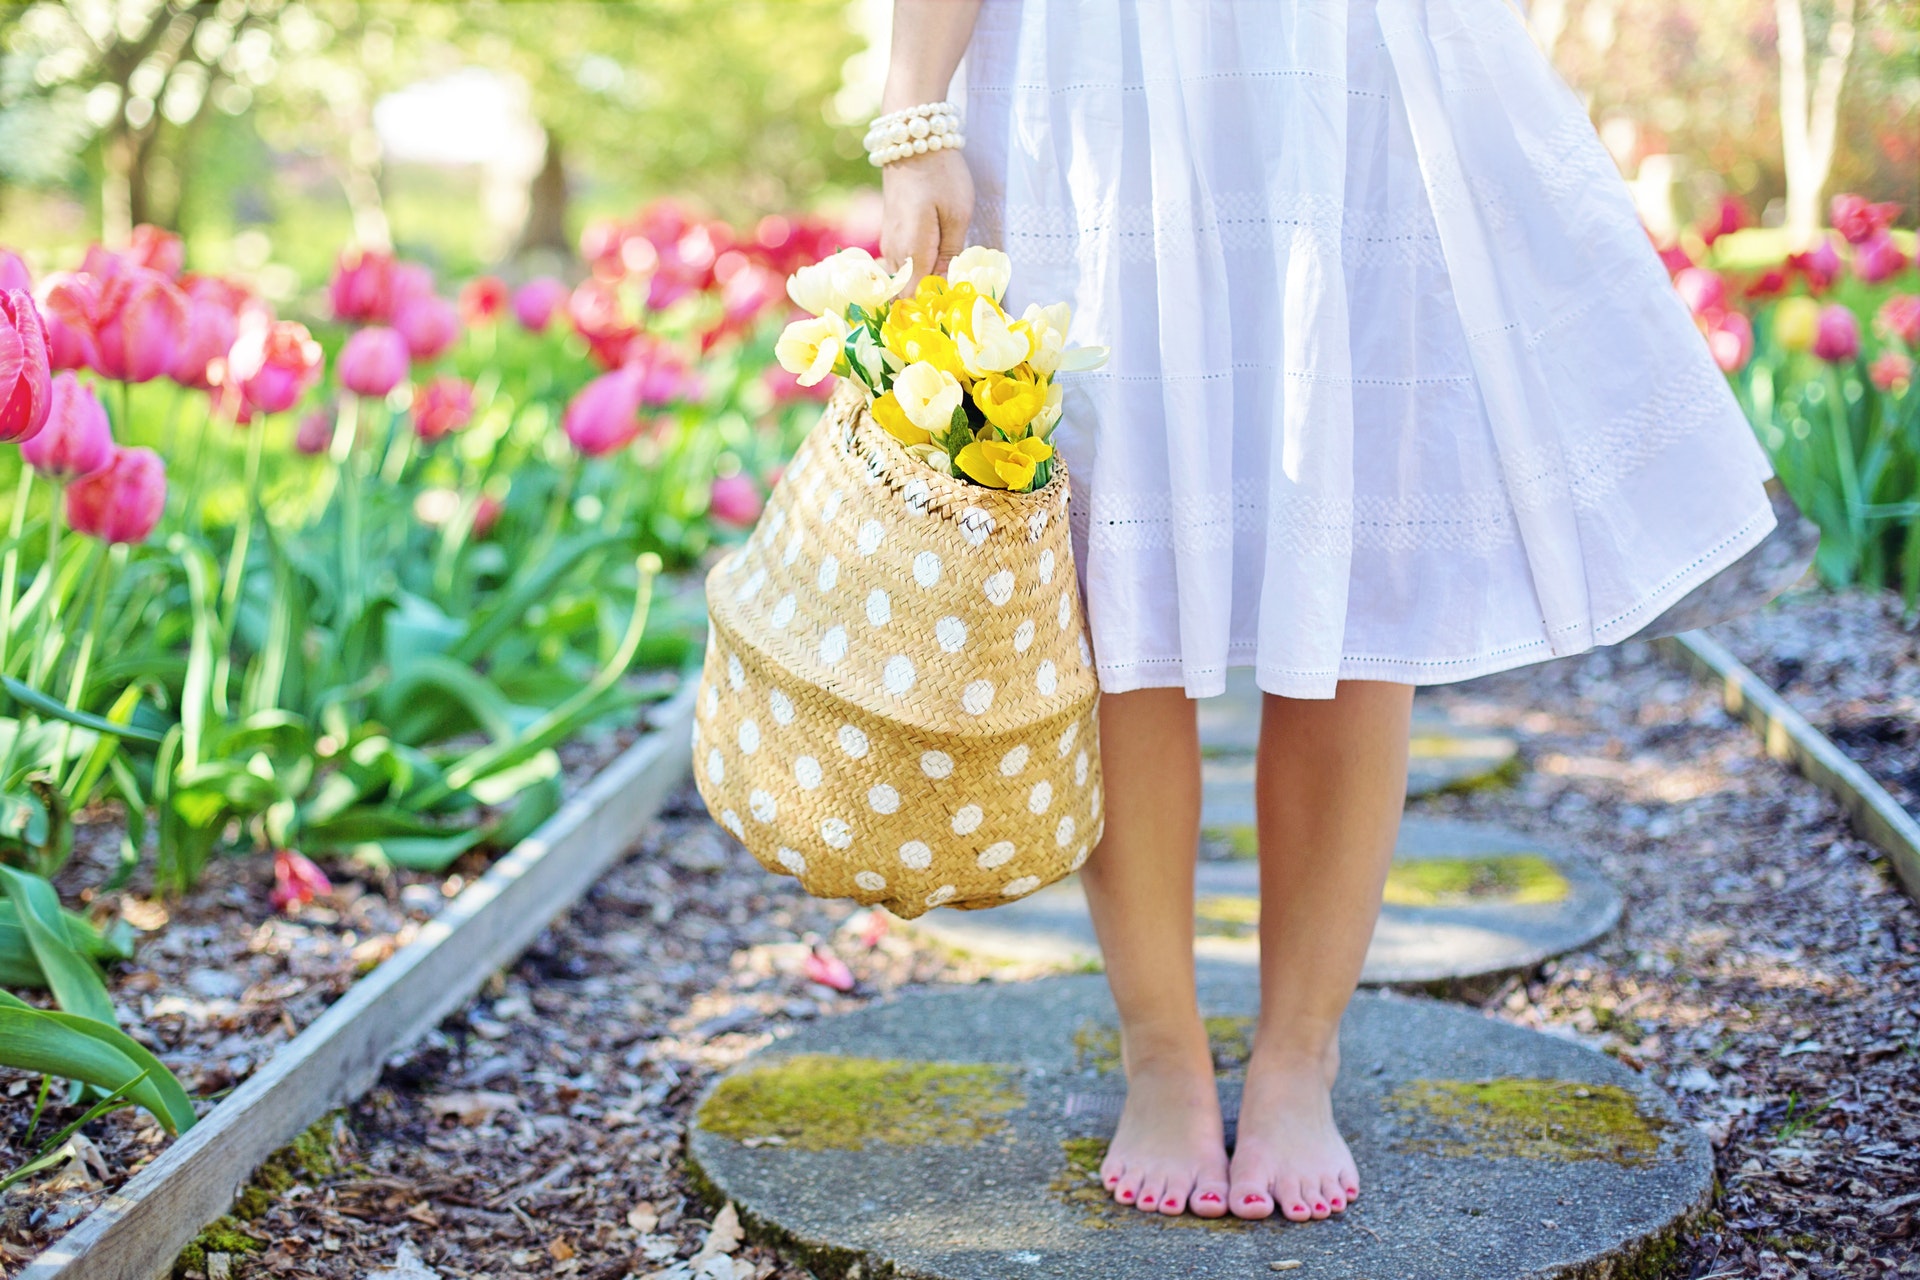 Lady in a white dress walking barefoot on a stone footpath with blooming flowers on the side.